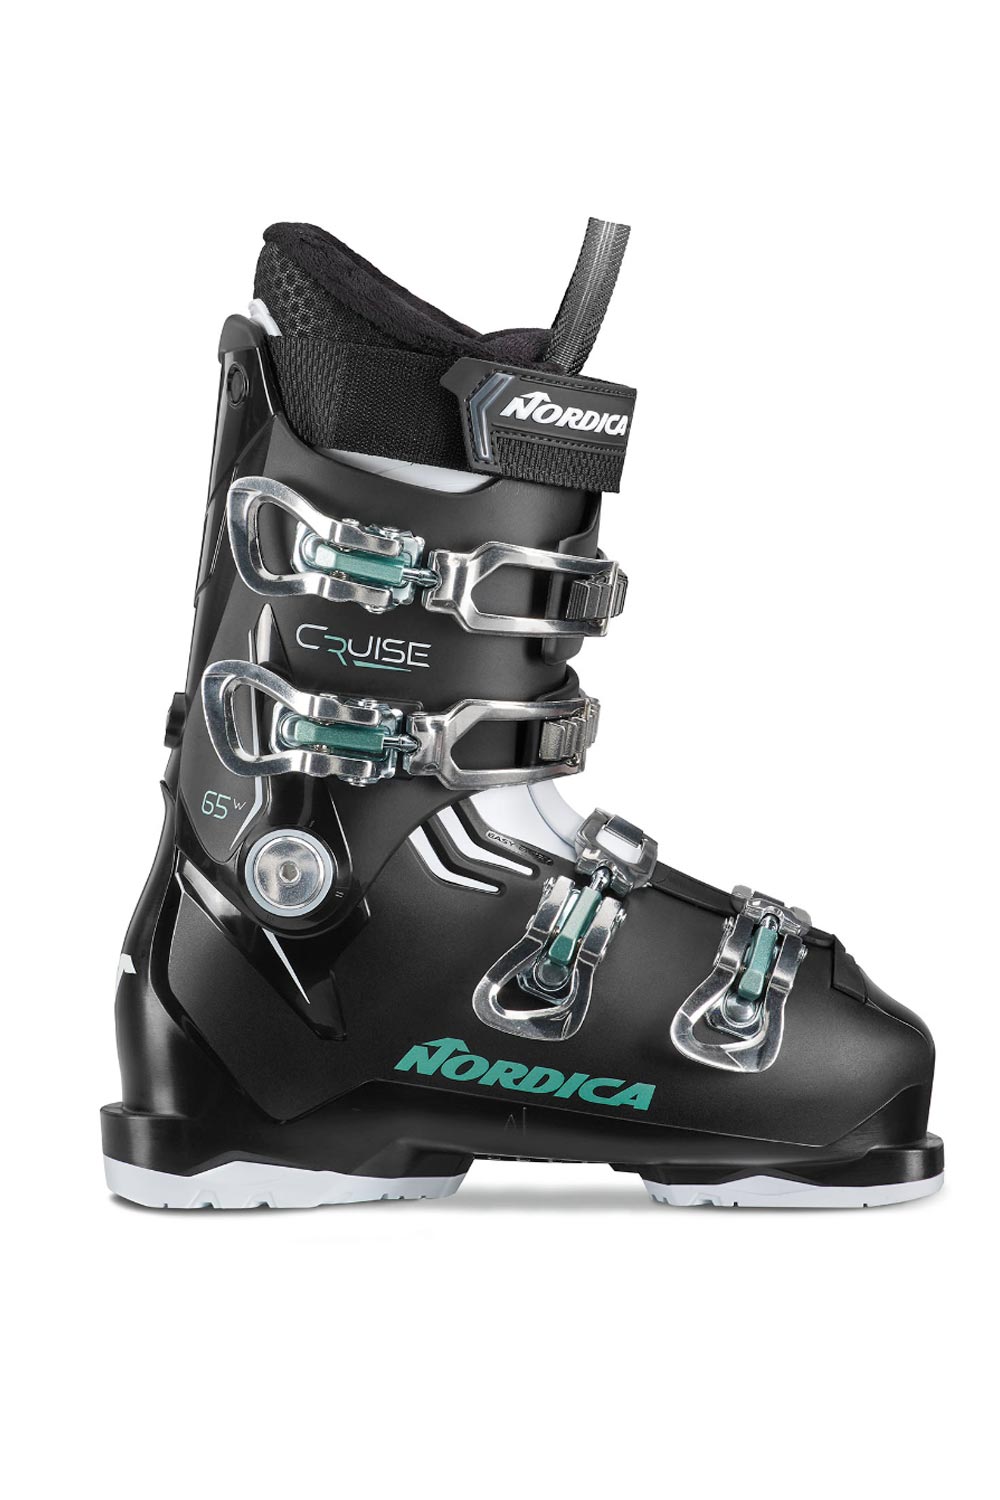 Nordica Cruise 65 W Boots - Women's